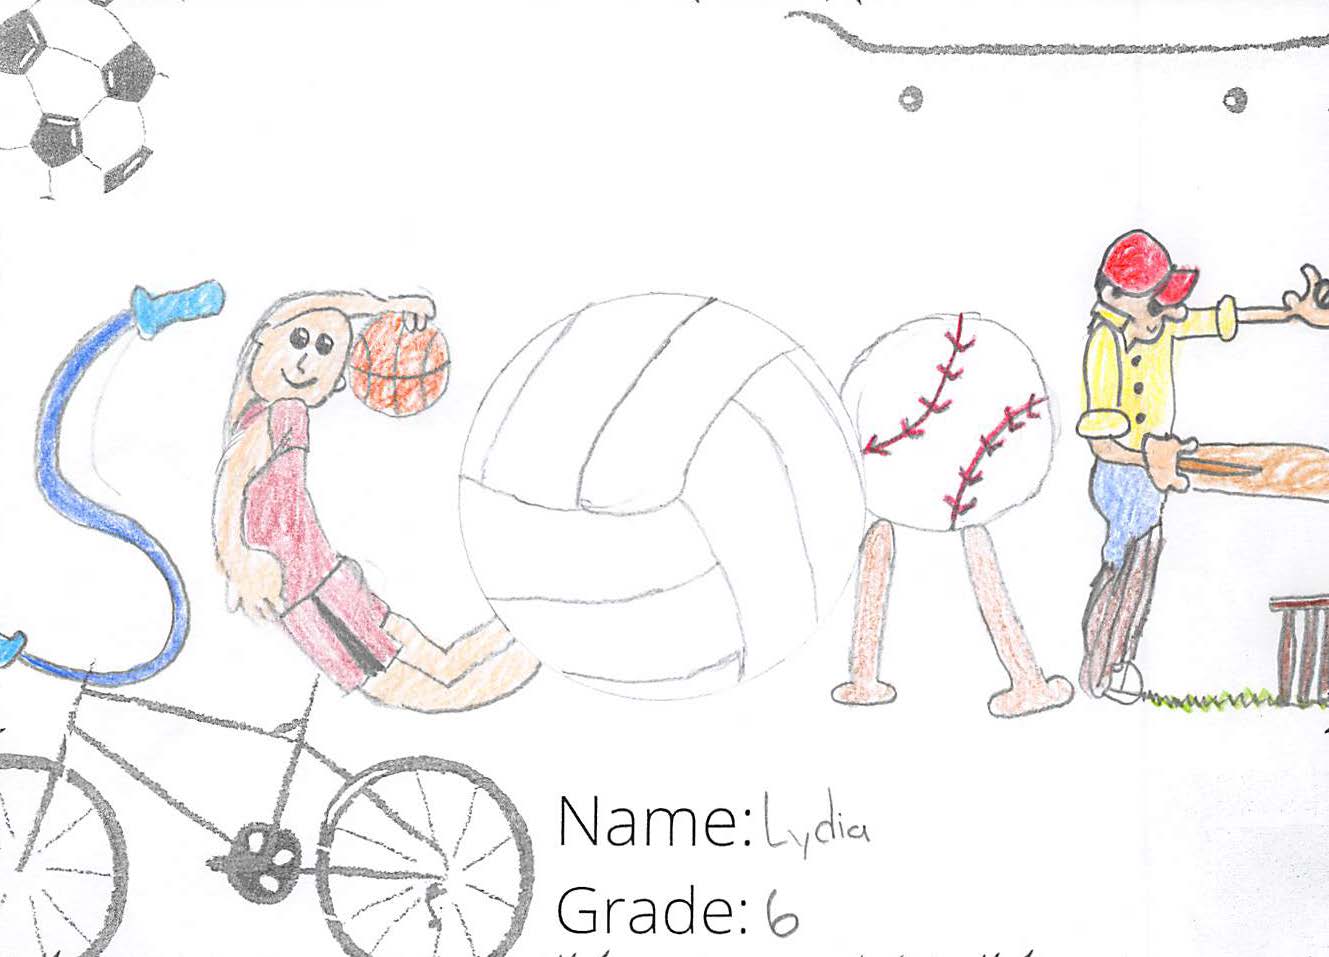 Pencil crayon drawing for the SCORE! logo contest. The drawing includes people playing sports within the word: SCORE.